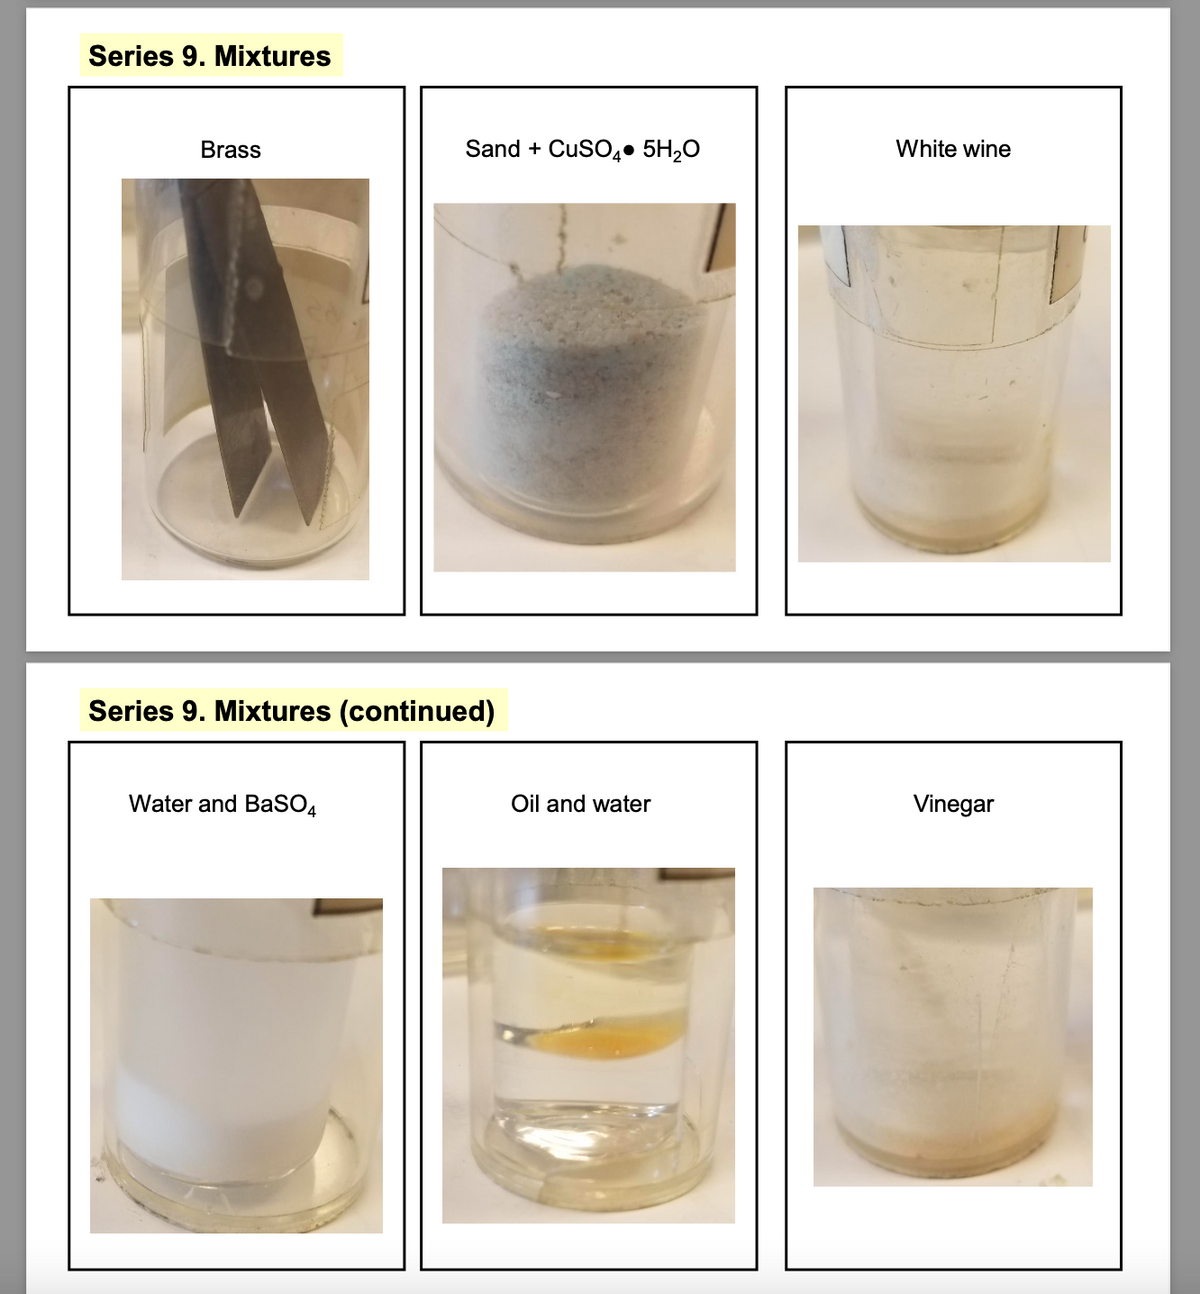 Series 9. Mixtures
Brass
Sand + CuSO4• 5H2O
White wine
Series 9. Mixtures (continued)
Water and BaSO4
Oil and water
Vinegar
